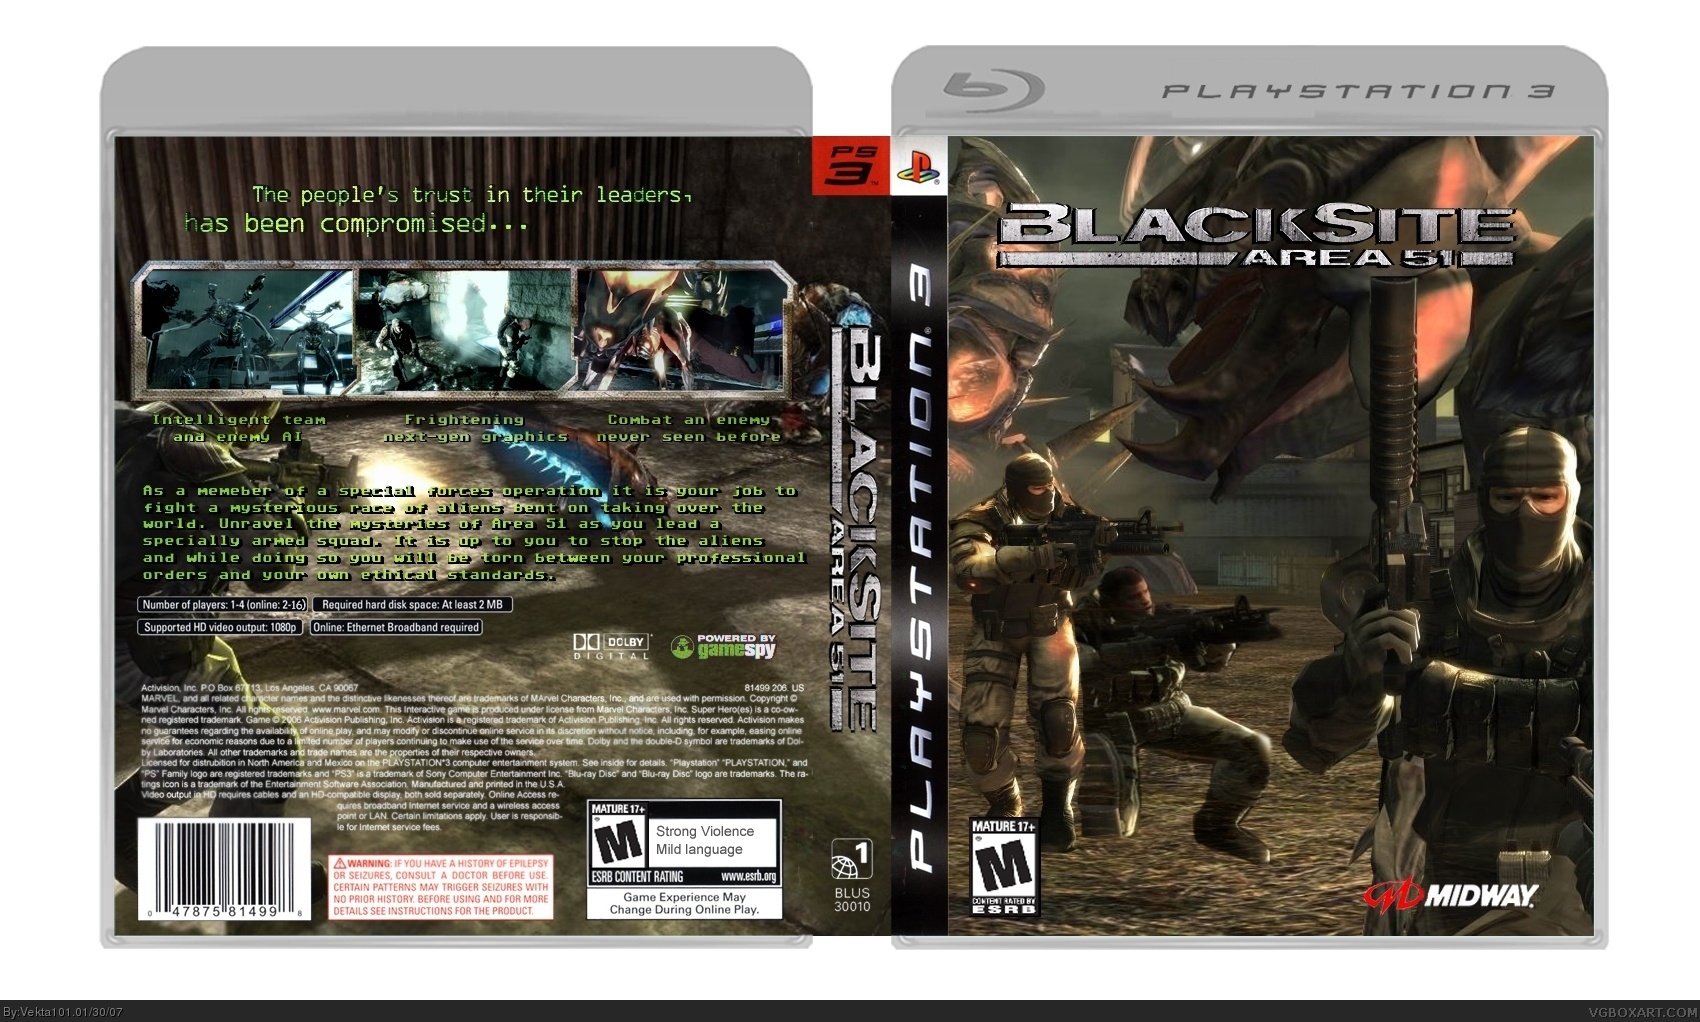 BlackSite: Area 51 (X360) - The Cover Project